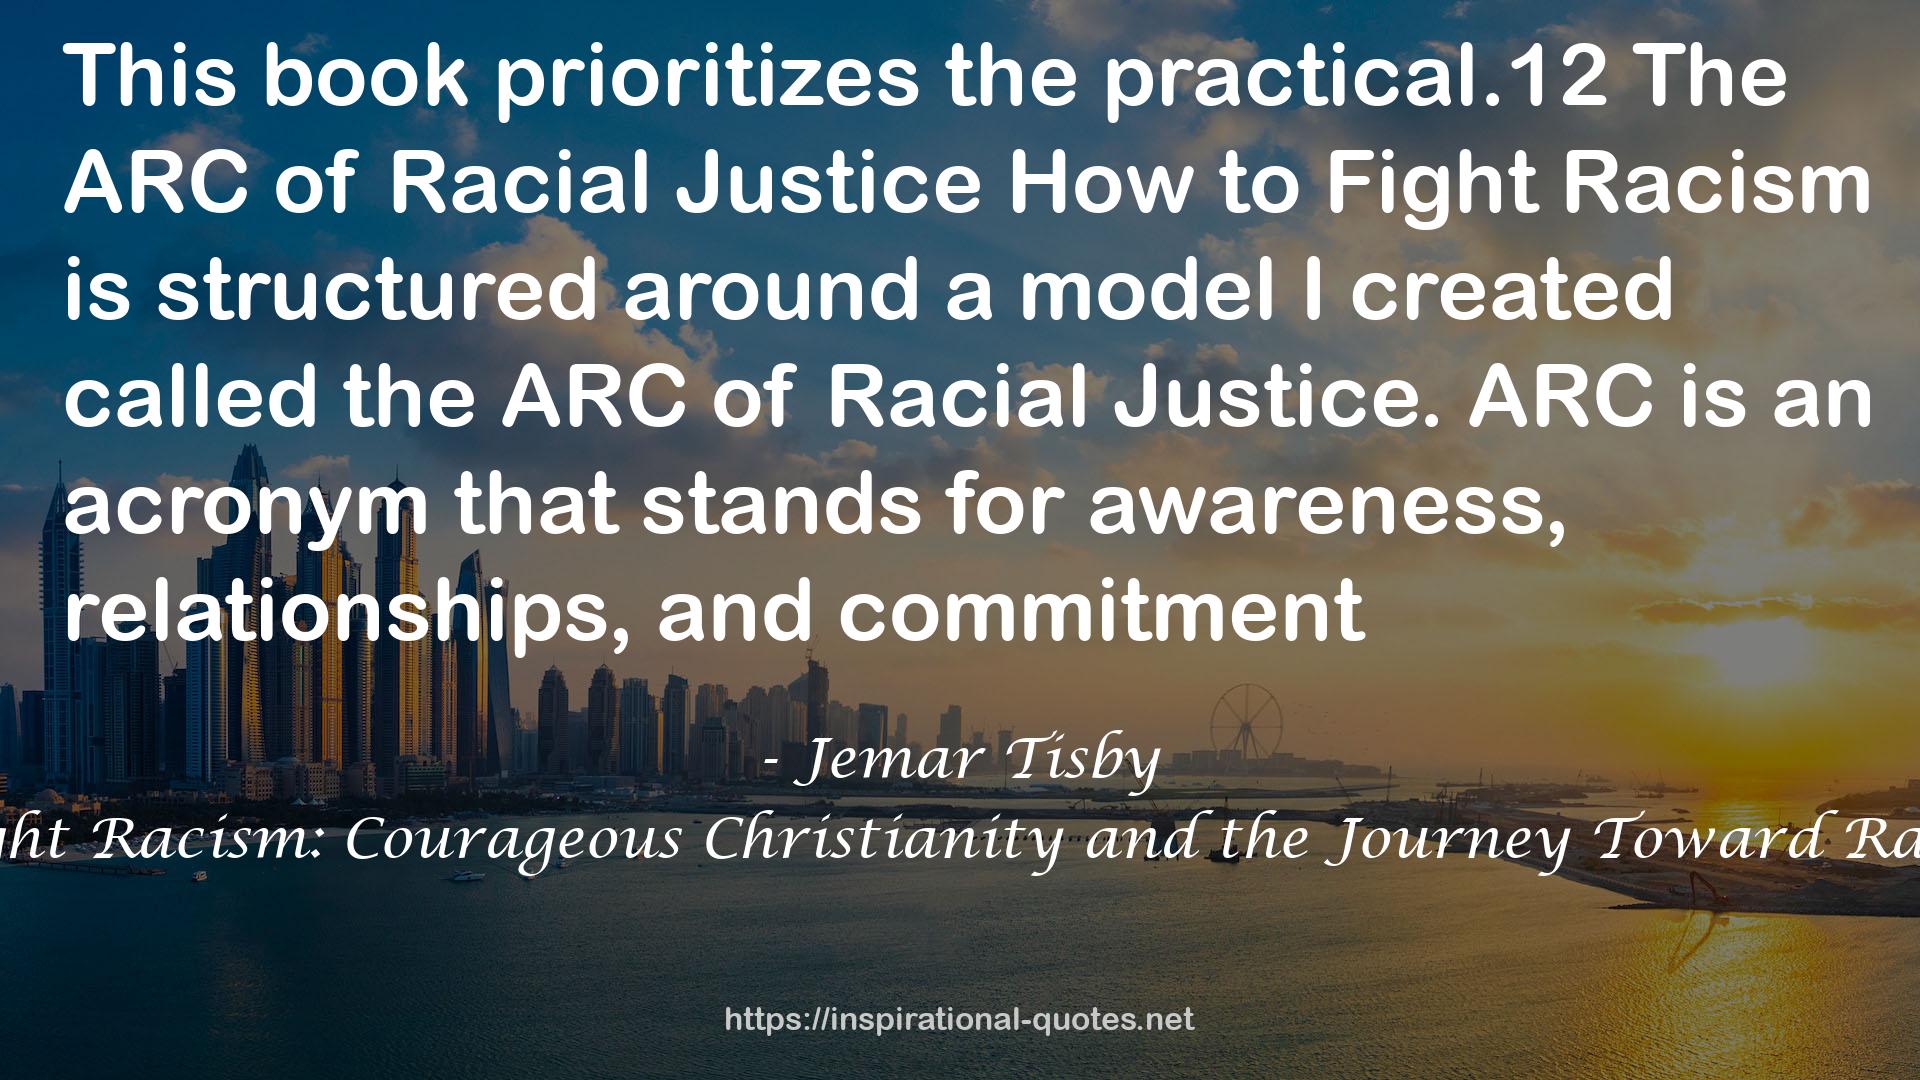 How to Fight Racism: Courageous Christianity and the Journey Toward Racial Justice QUOTES